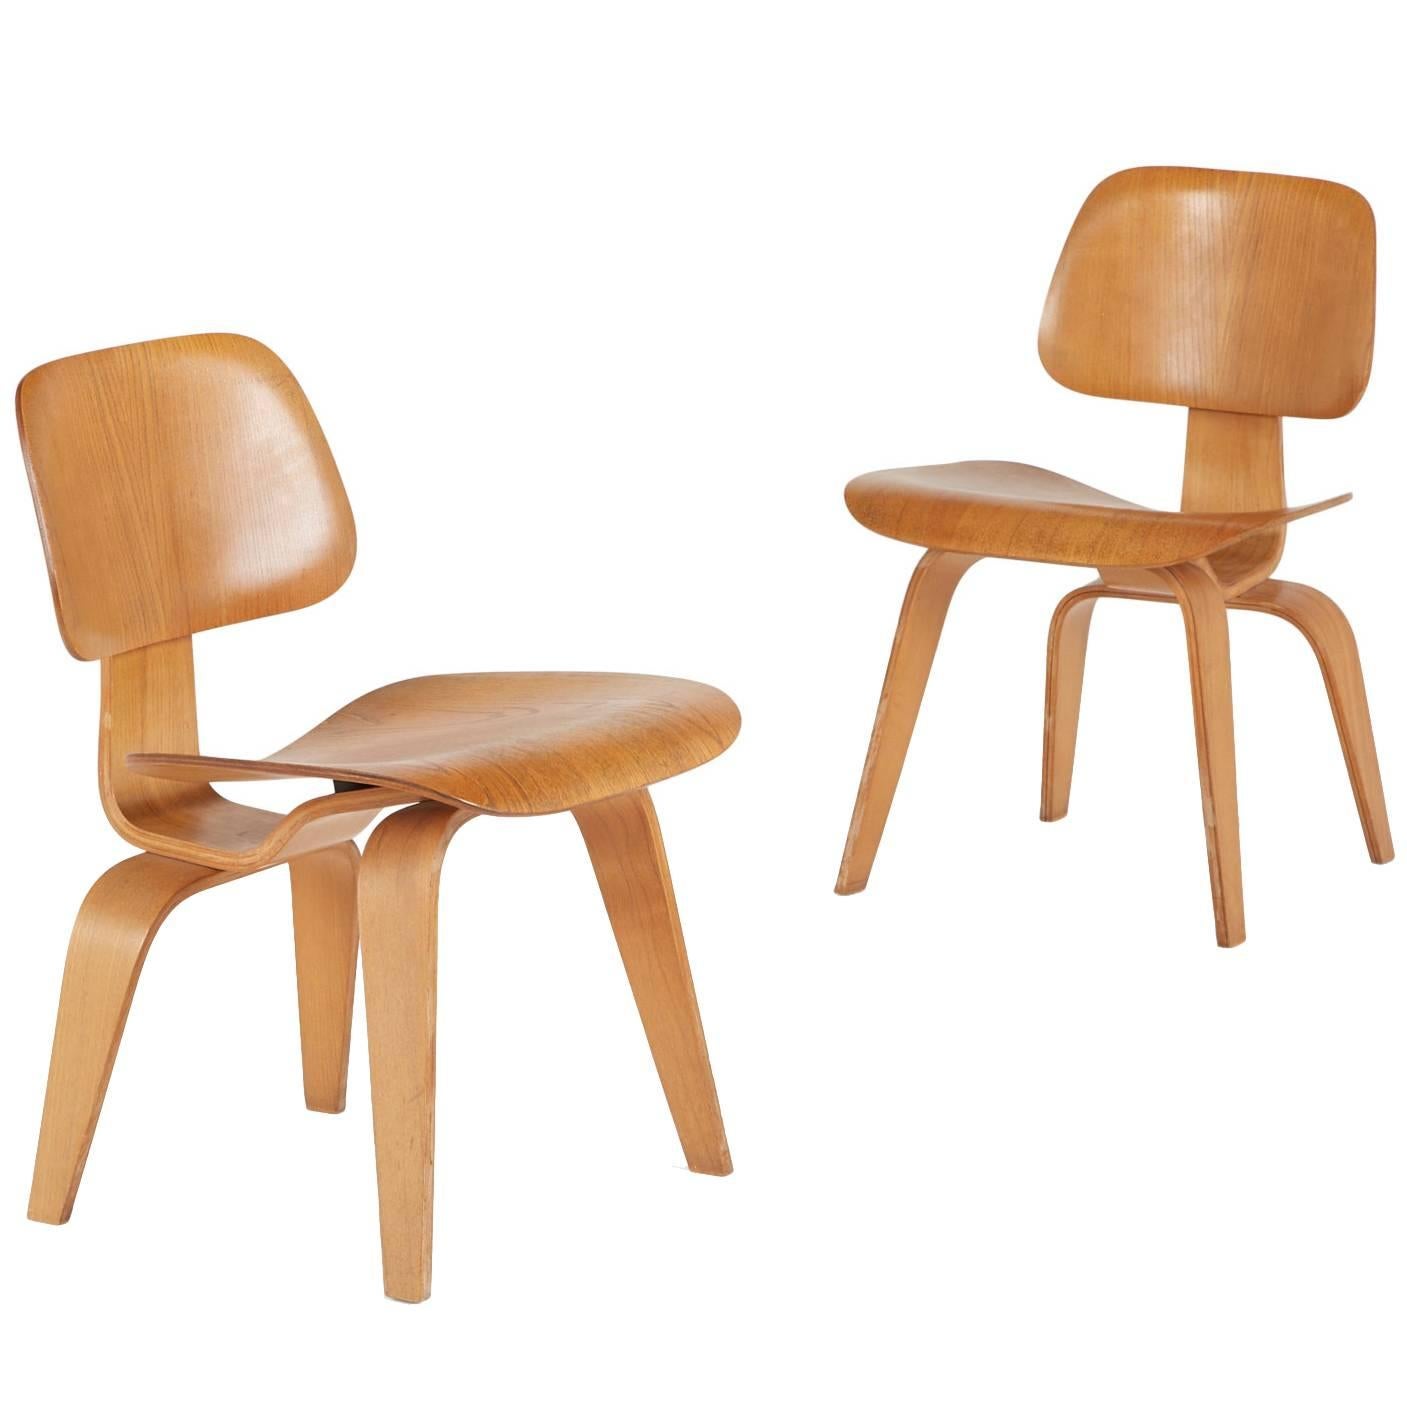 Evans Rare 1940s DCW Molded Plywood Chairs by Charles and Ray Eames